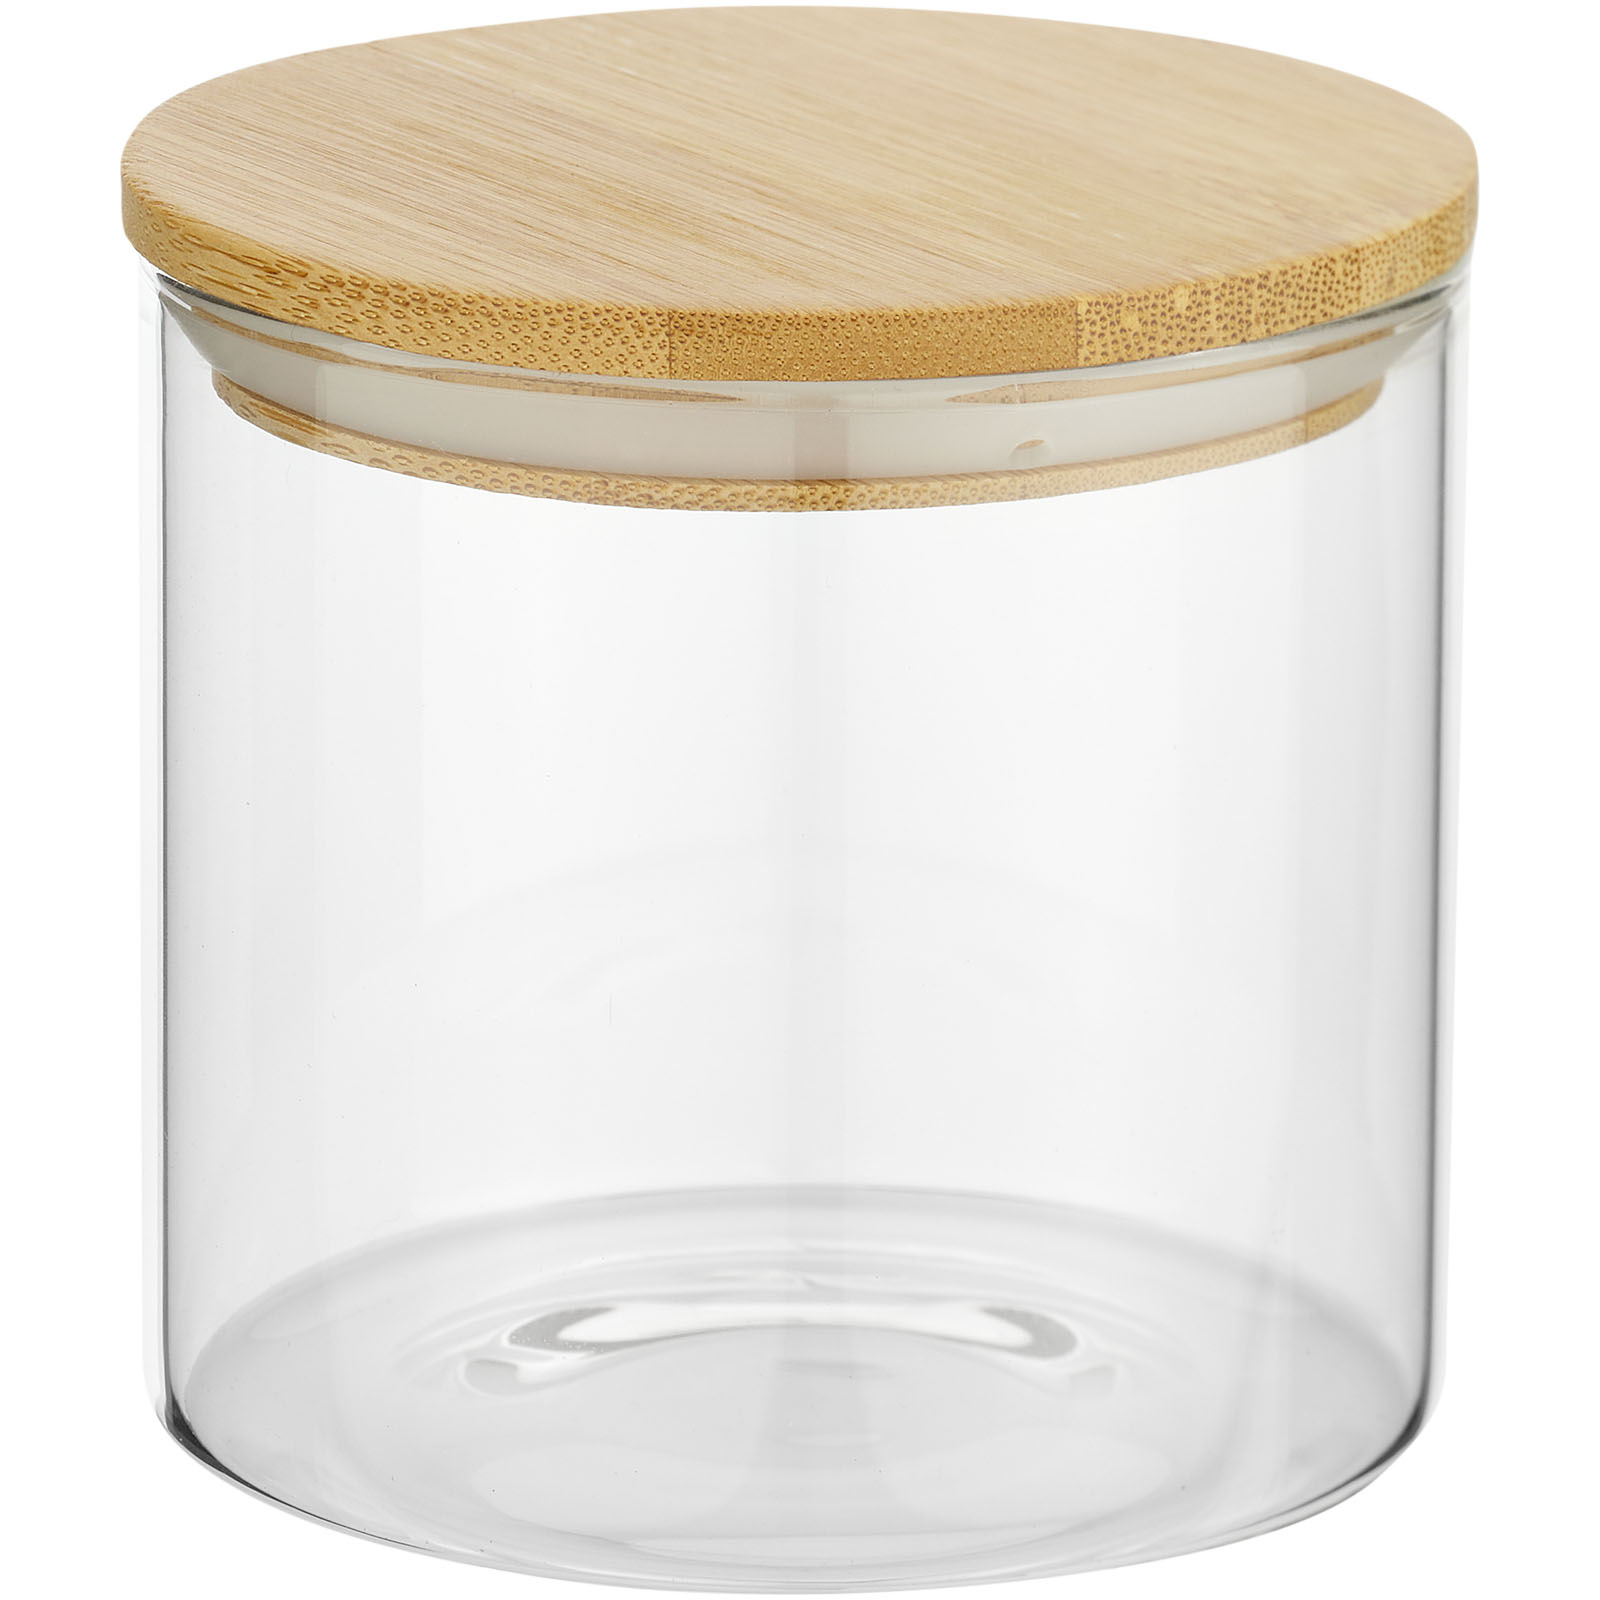 Home & Kitchen - Boley 320 ml glass food container